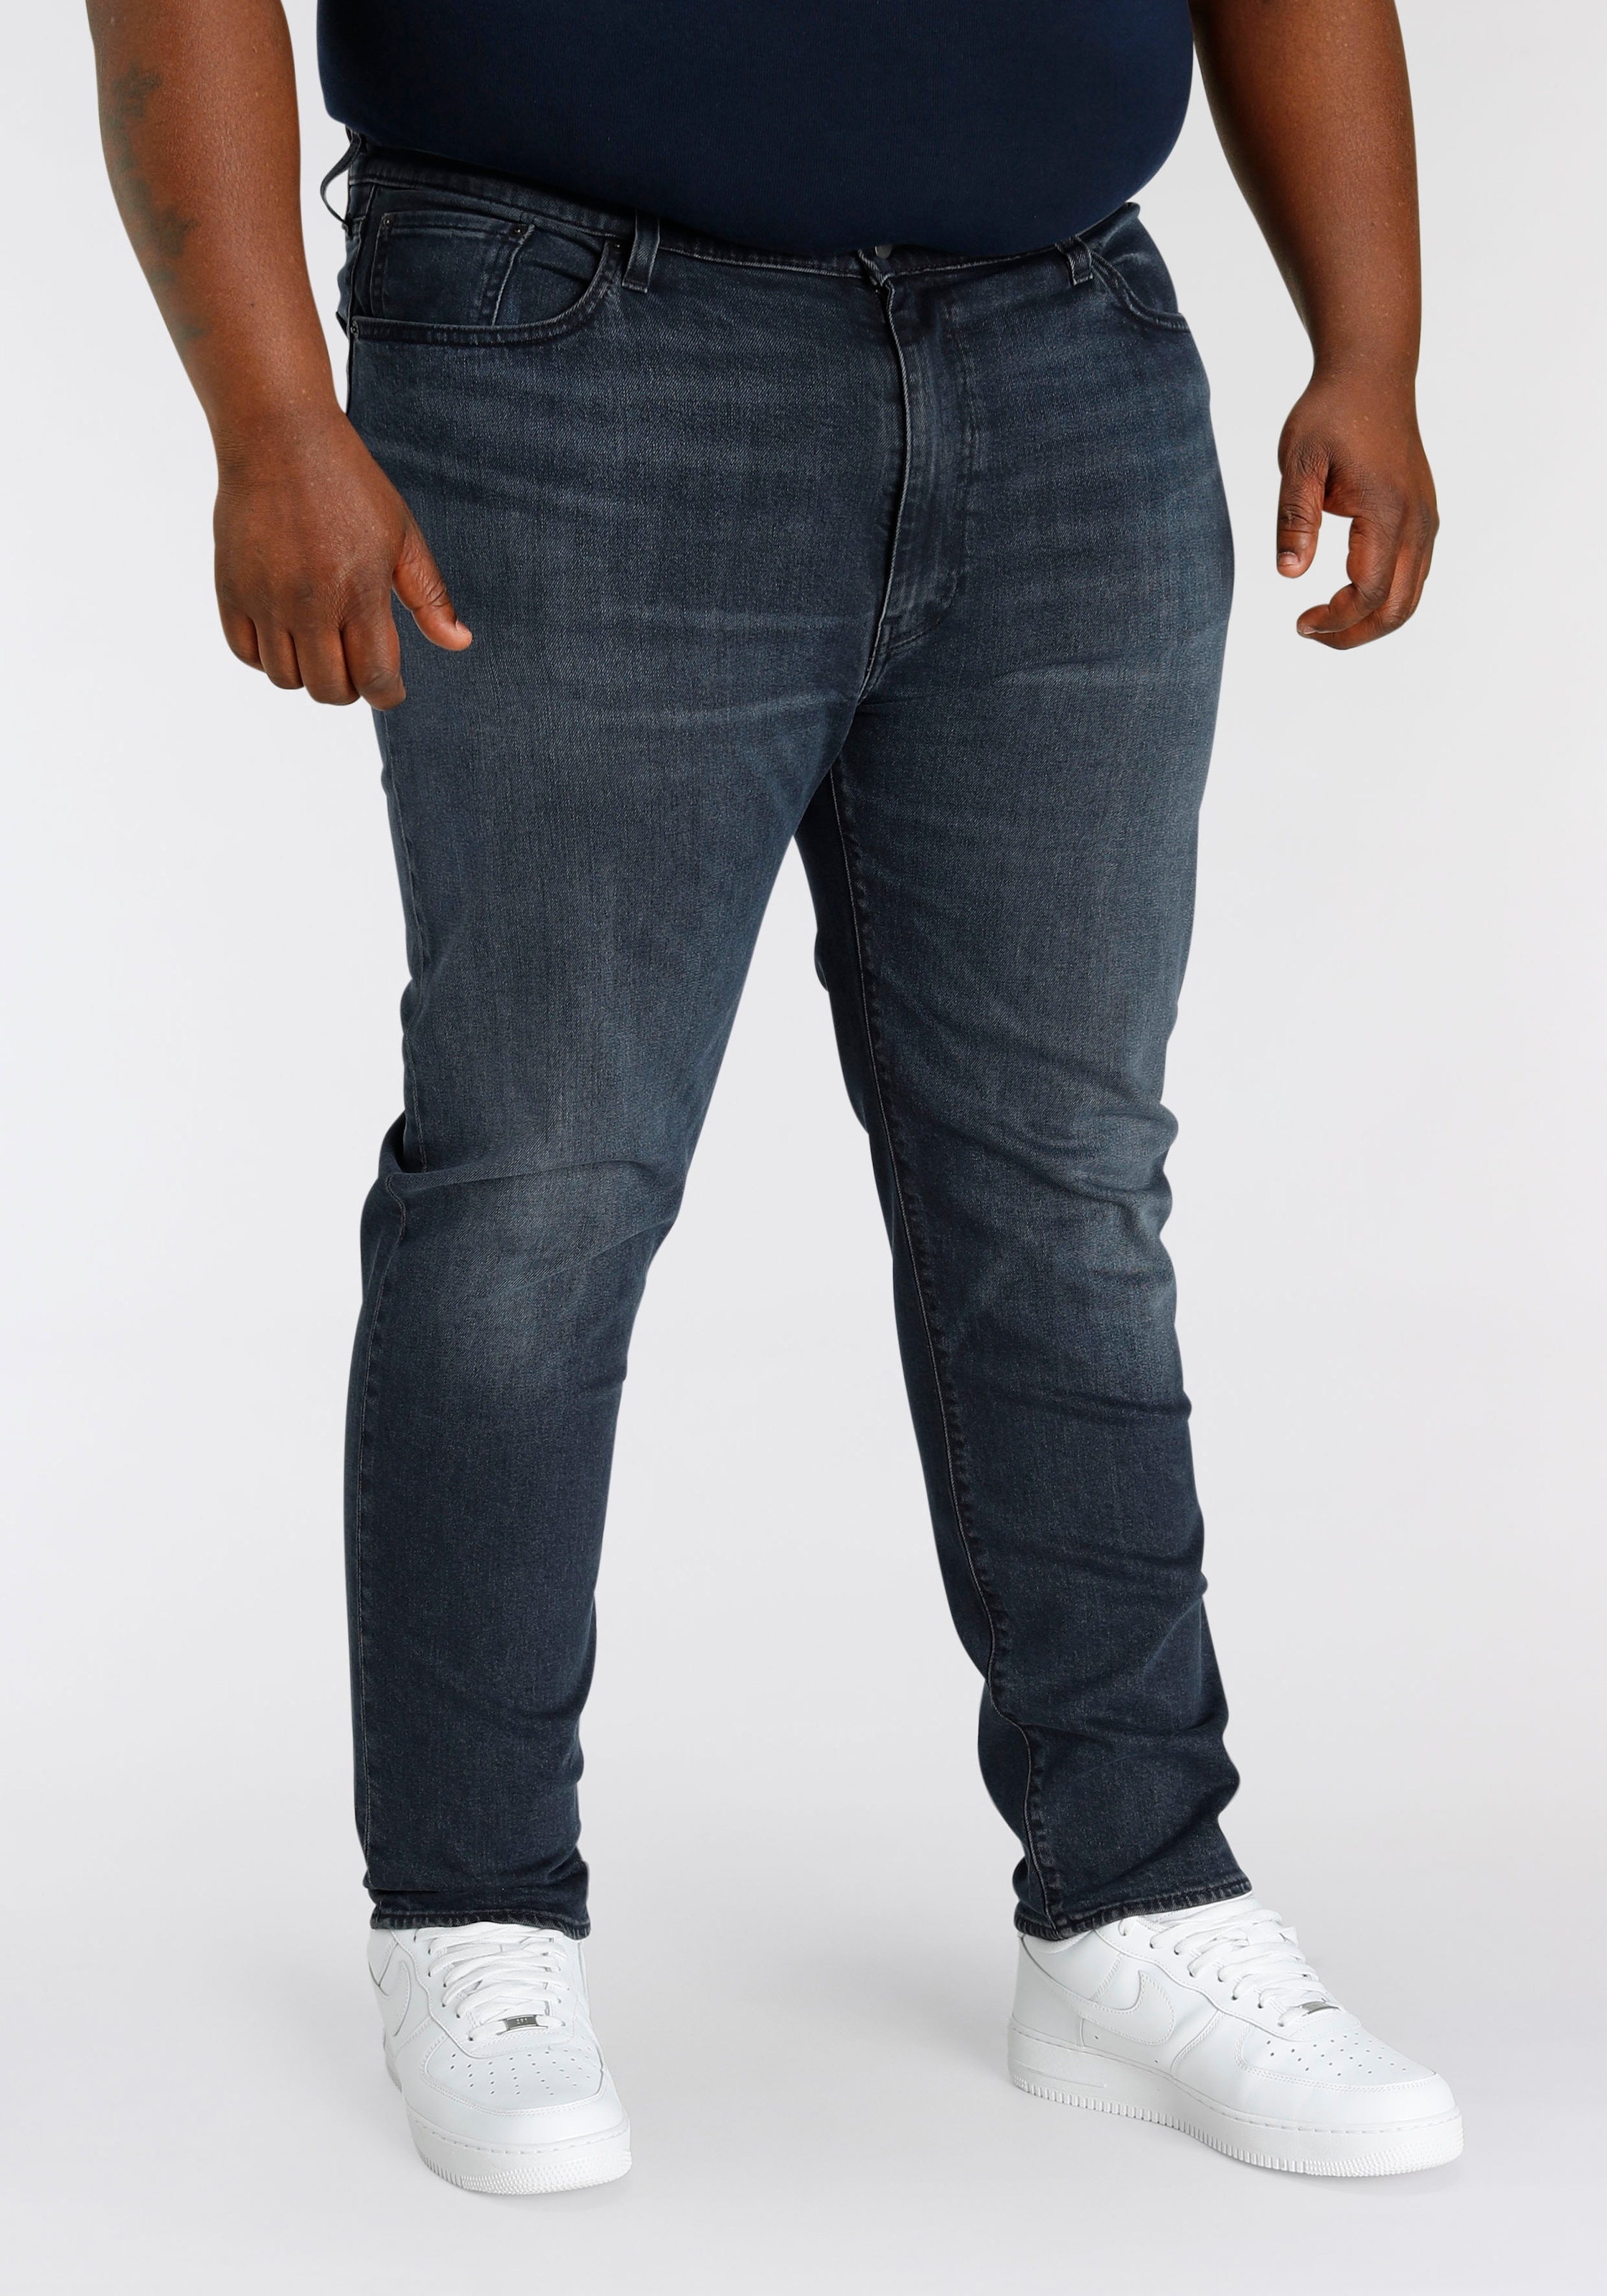 Levis Plus Tapered-fit-Jeans "512", in authentischer Waschung